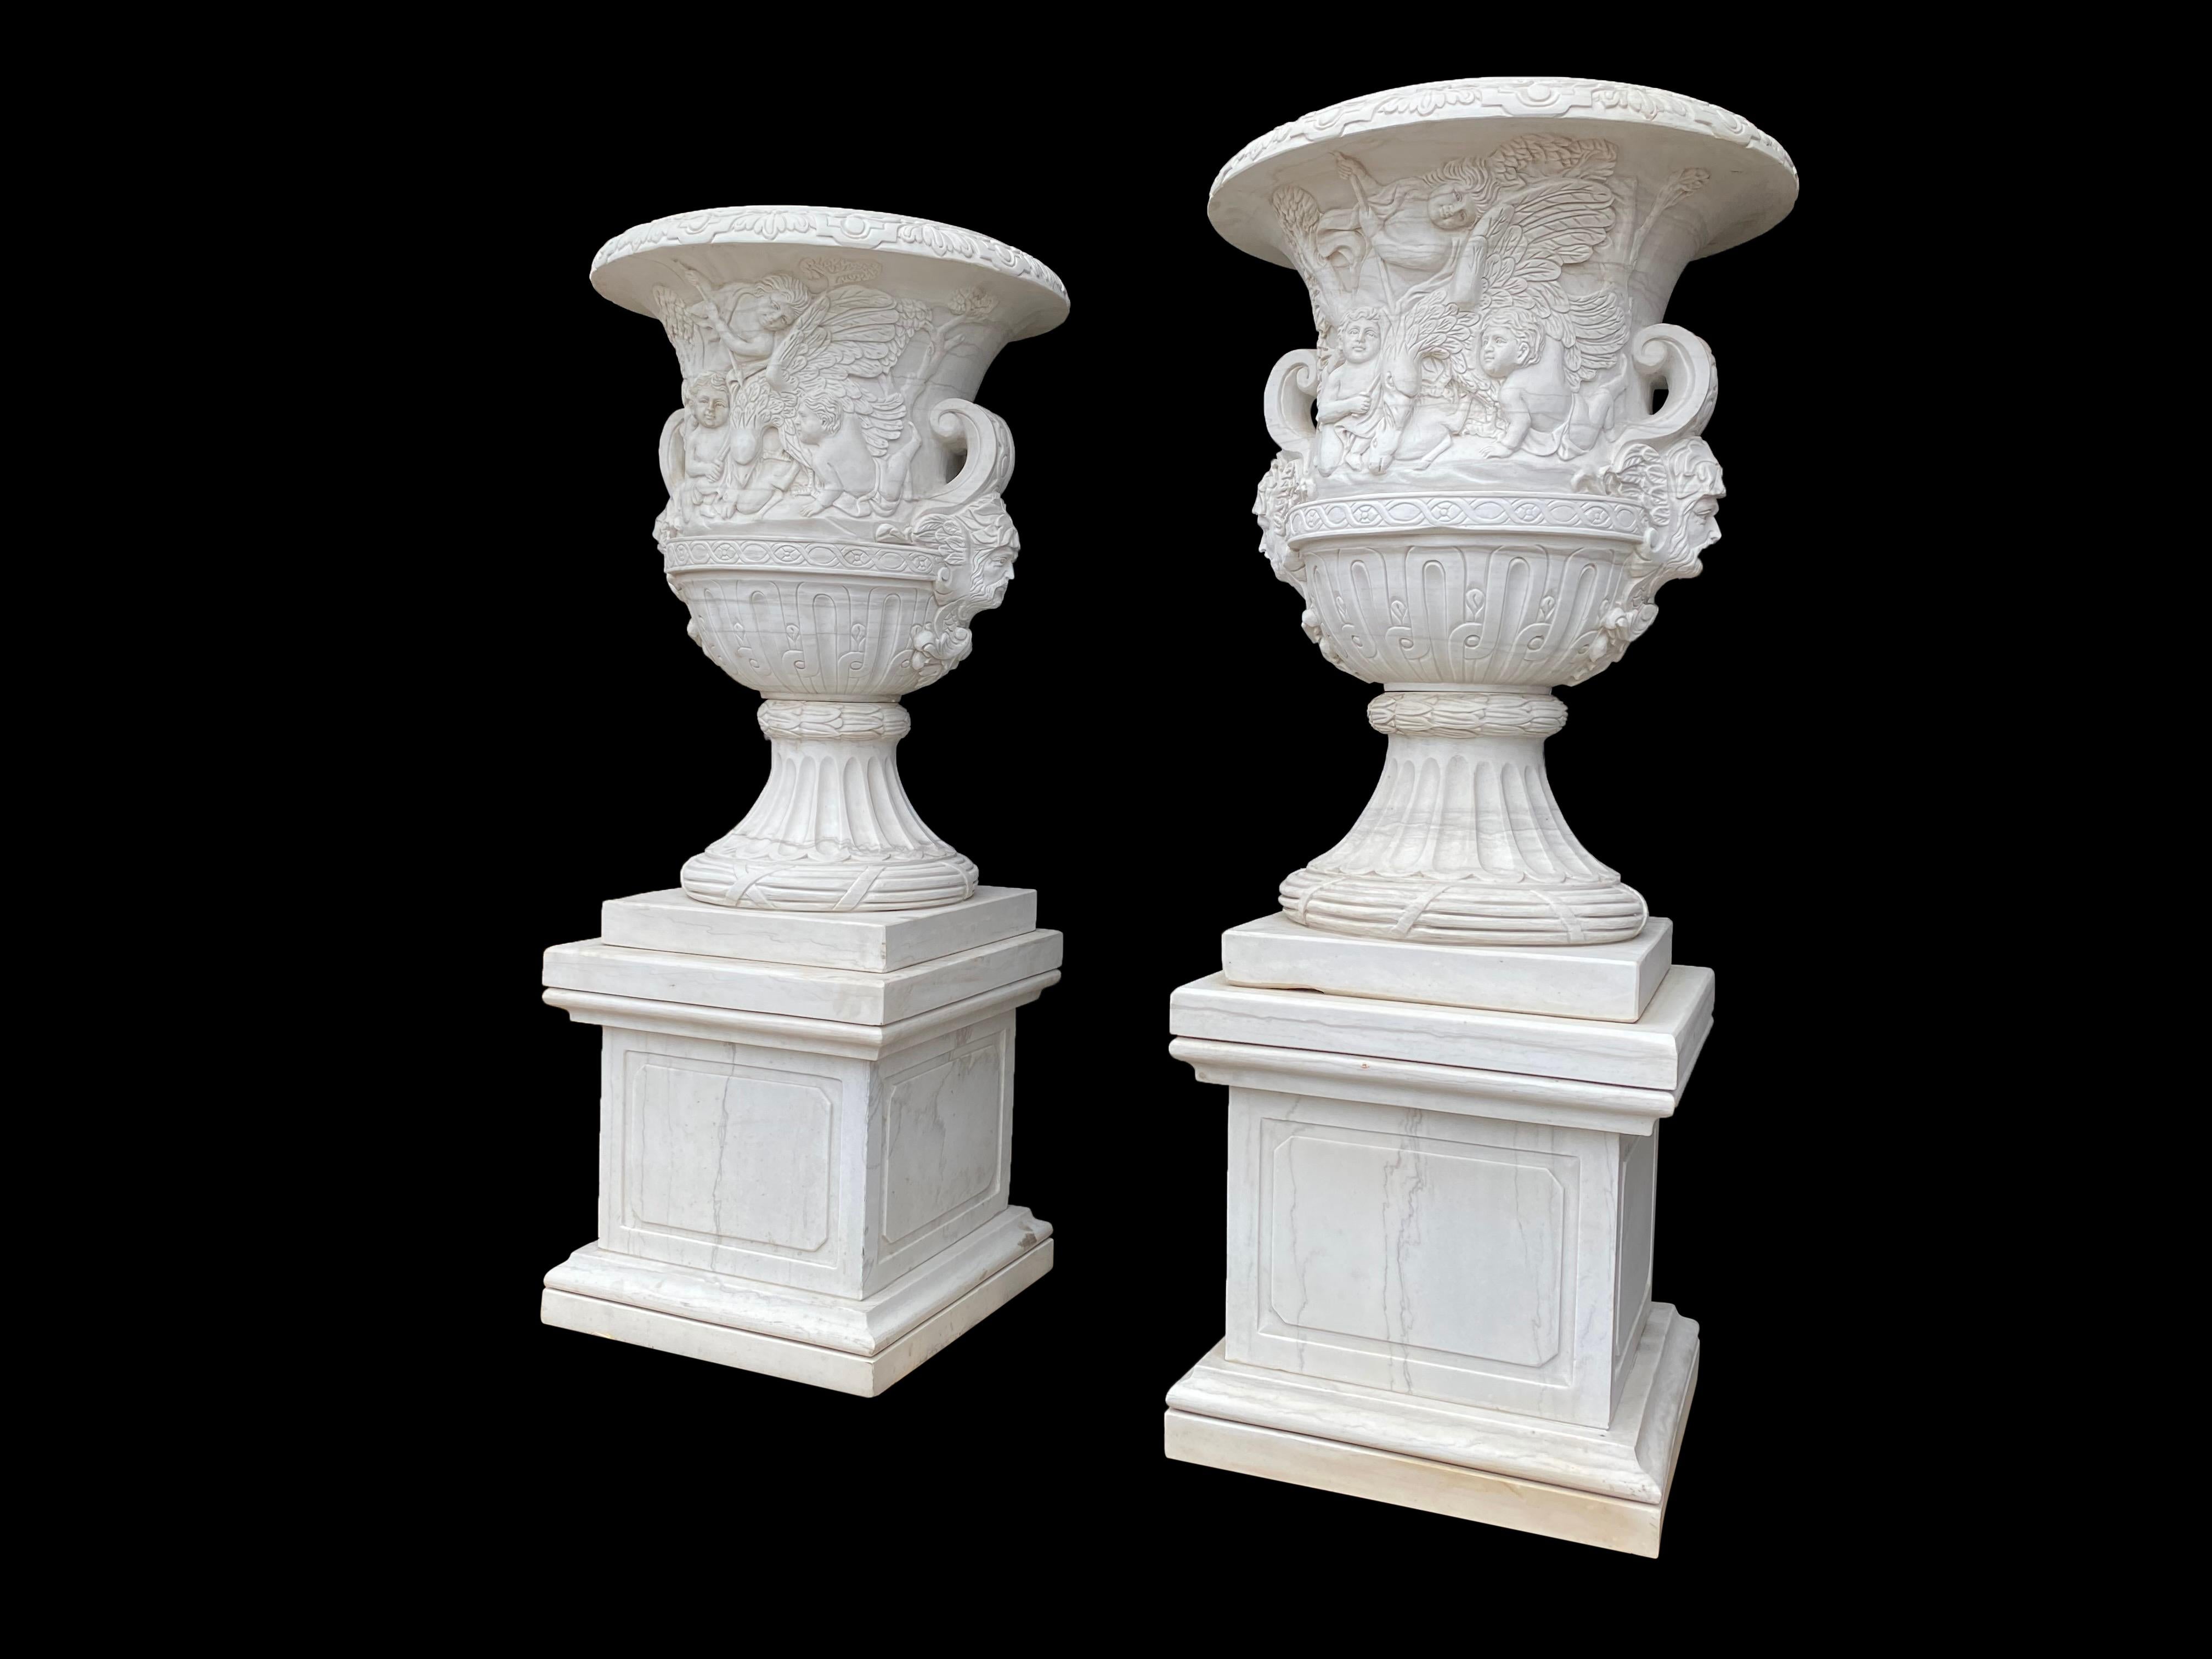 Pair of White Carrara Marble Campana-form Urns, 21st Century For Sale 2